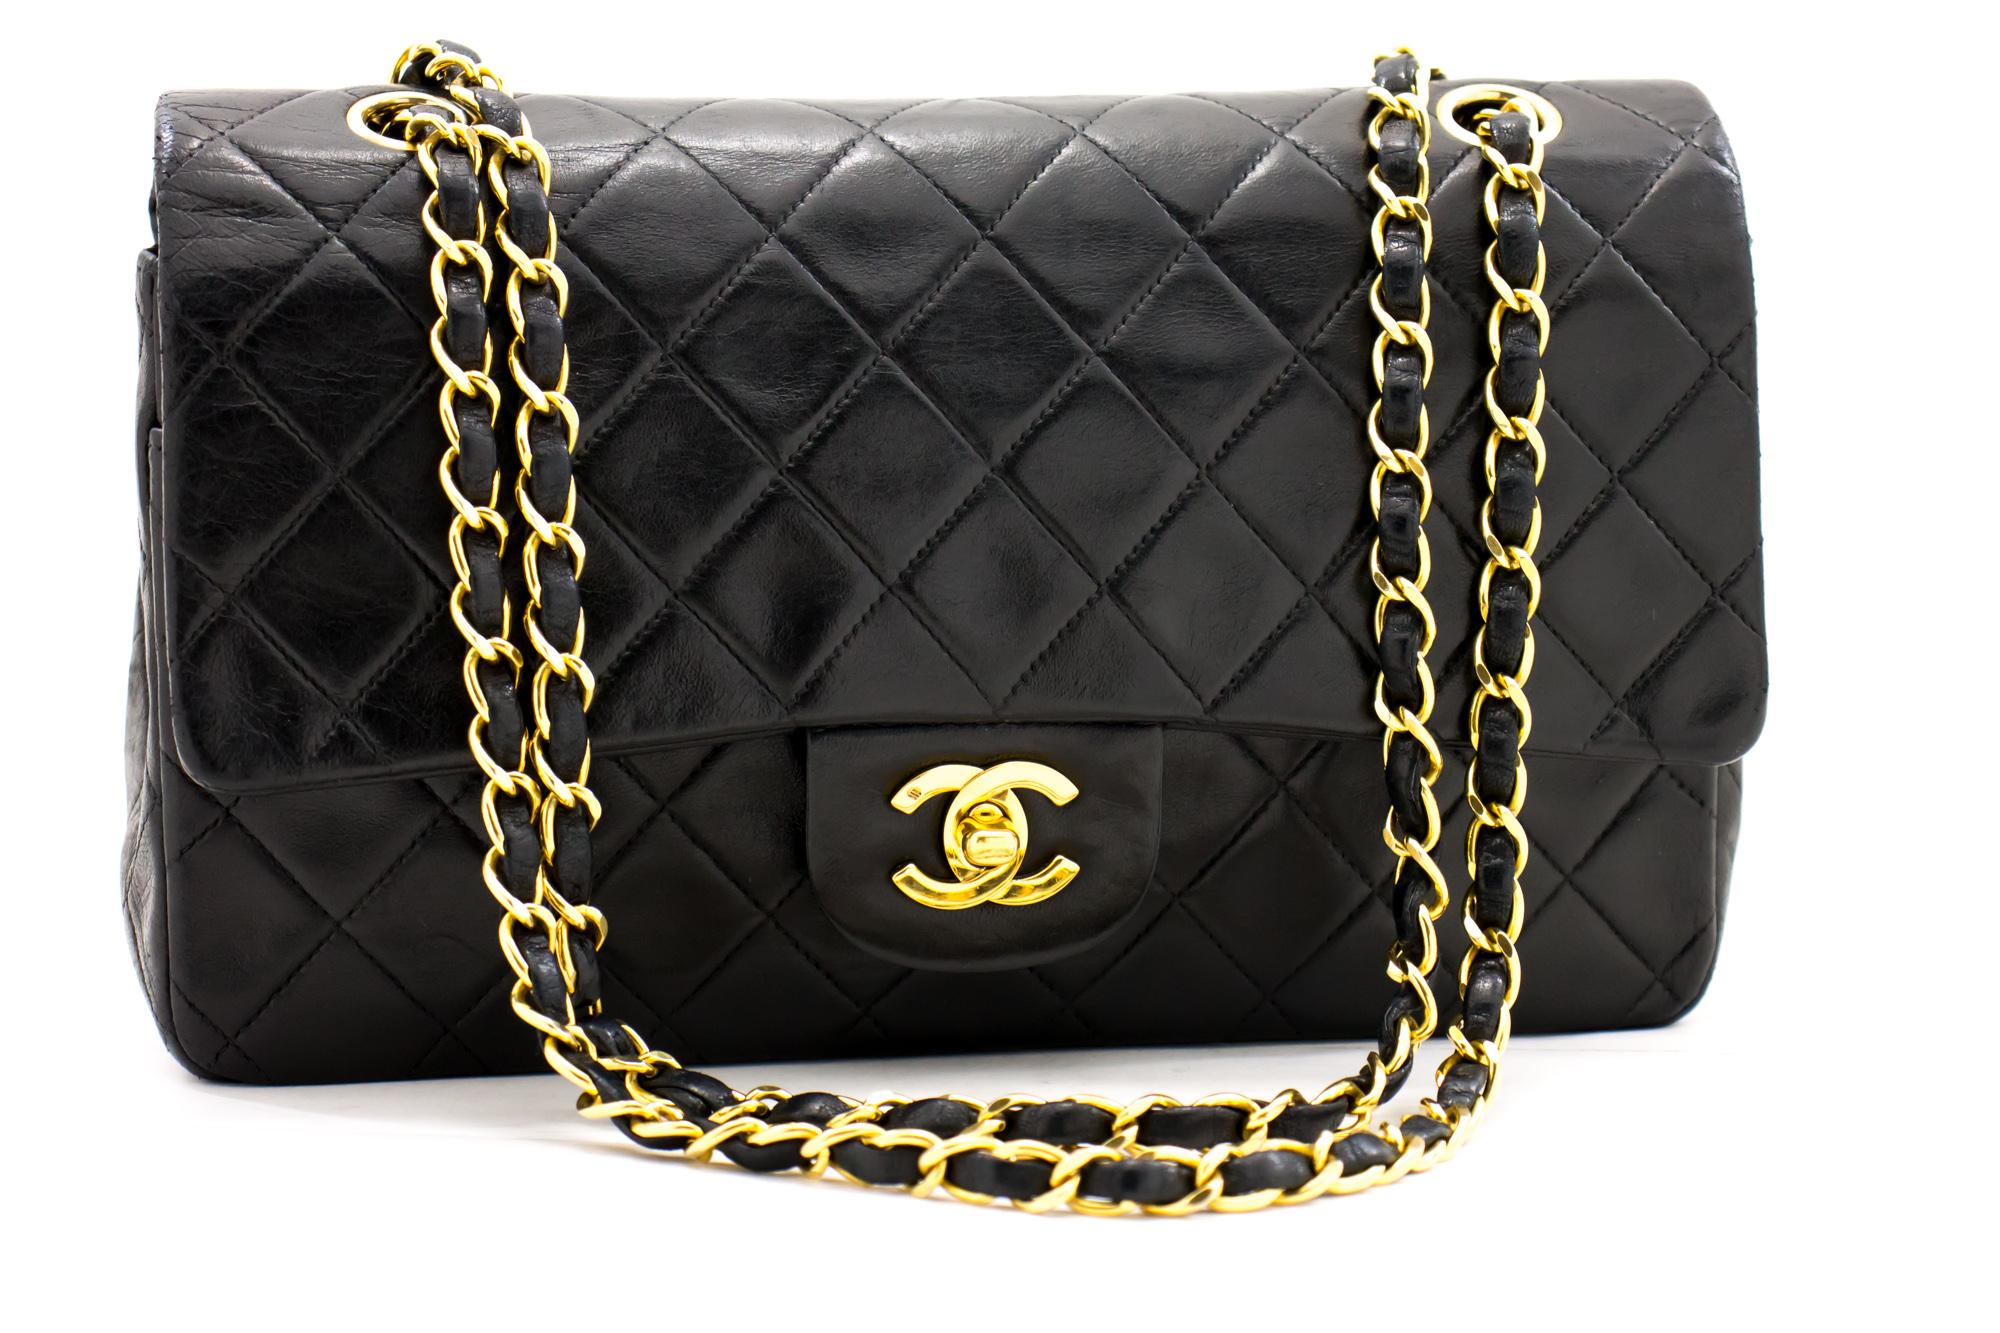 An authentic CHANEL 2.55 Classic Double Flap Medium Chain Shoulder Bag Black made of black Lambskin. The color is Black. The outside material is Leather. The pattern is Solid. This item is Vintage / Classic. The year of manufacture would be